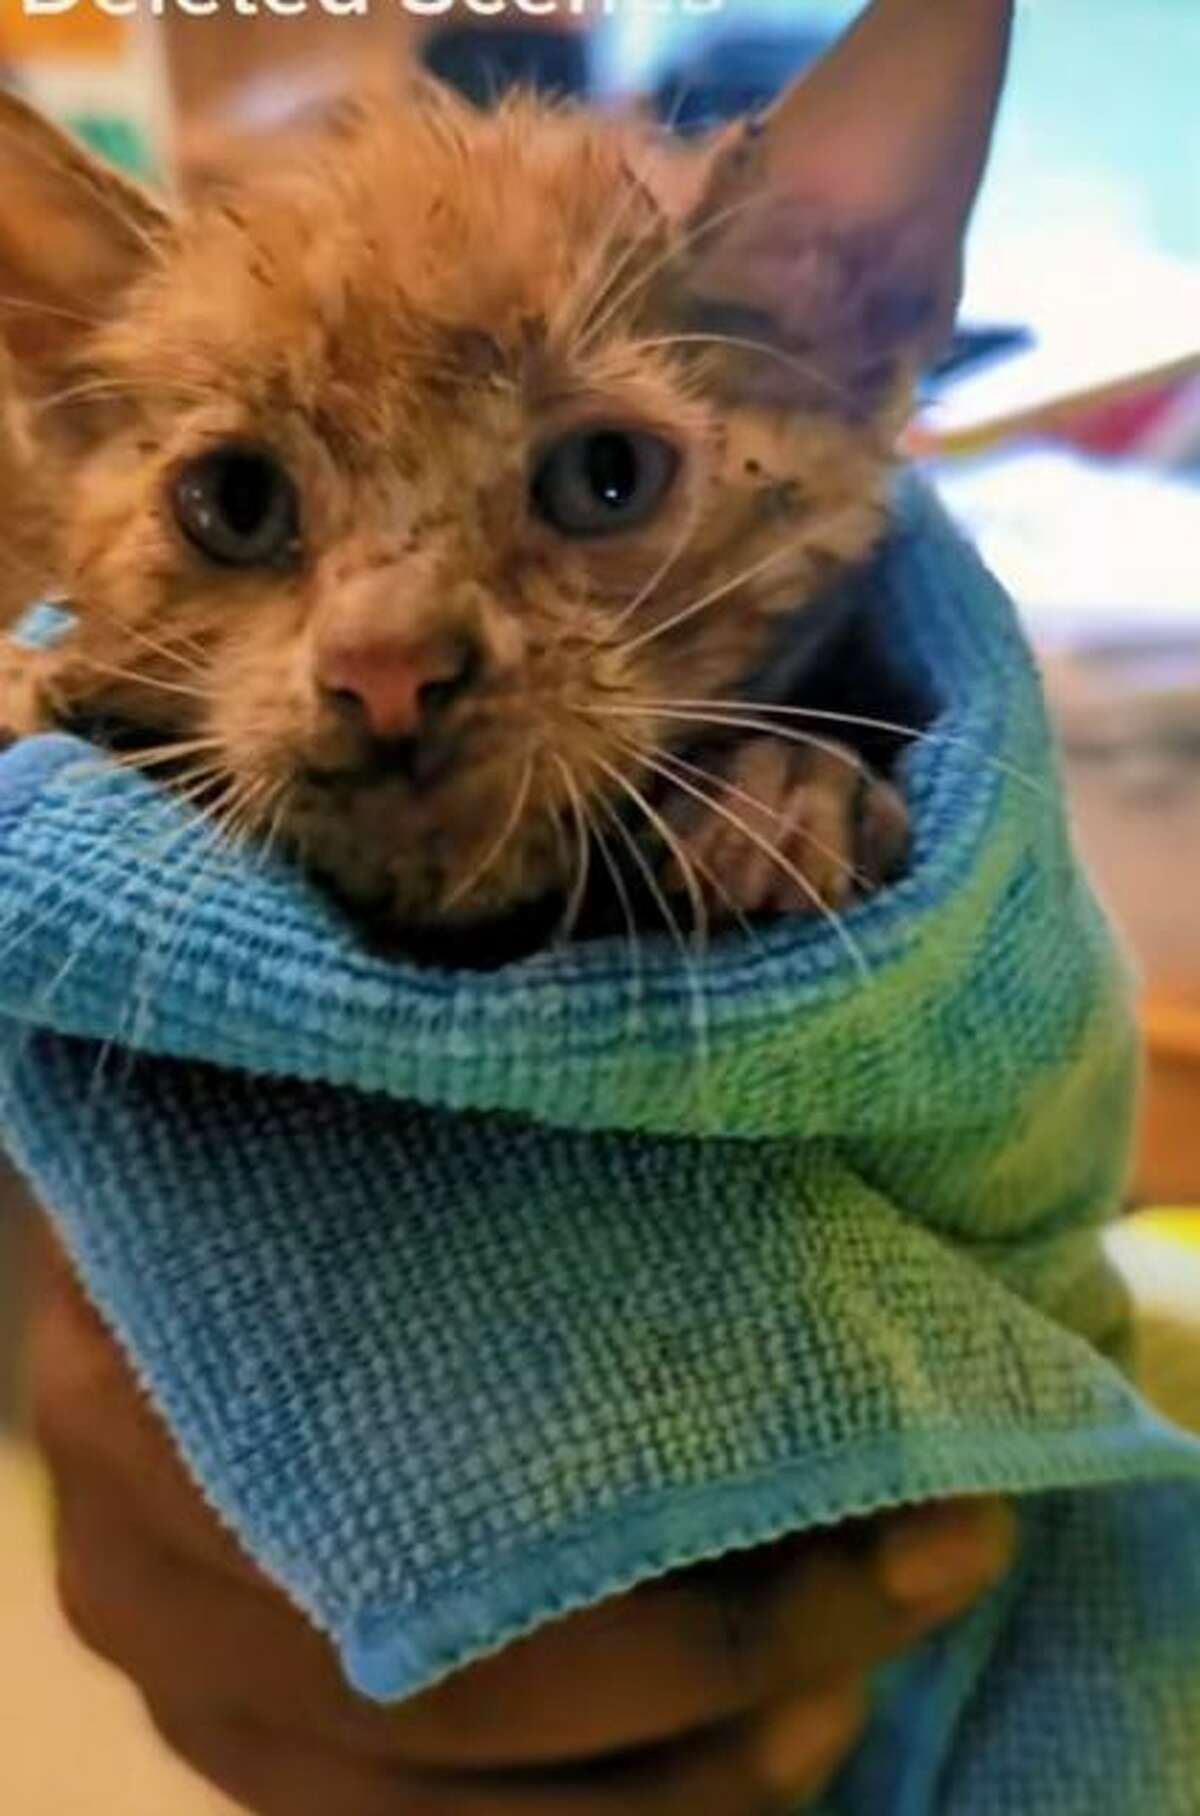 Kyle Norton, a project manager from Cheshire, rescued a stray orange kitten last September.